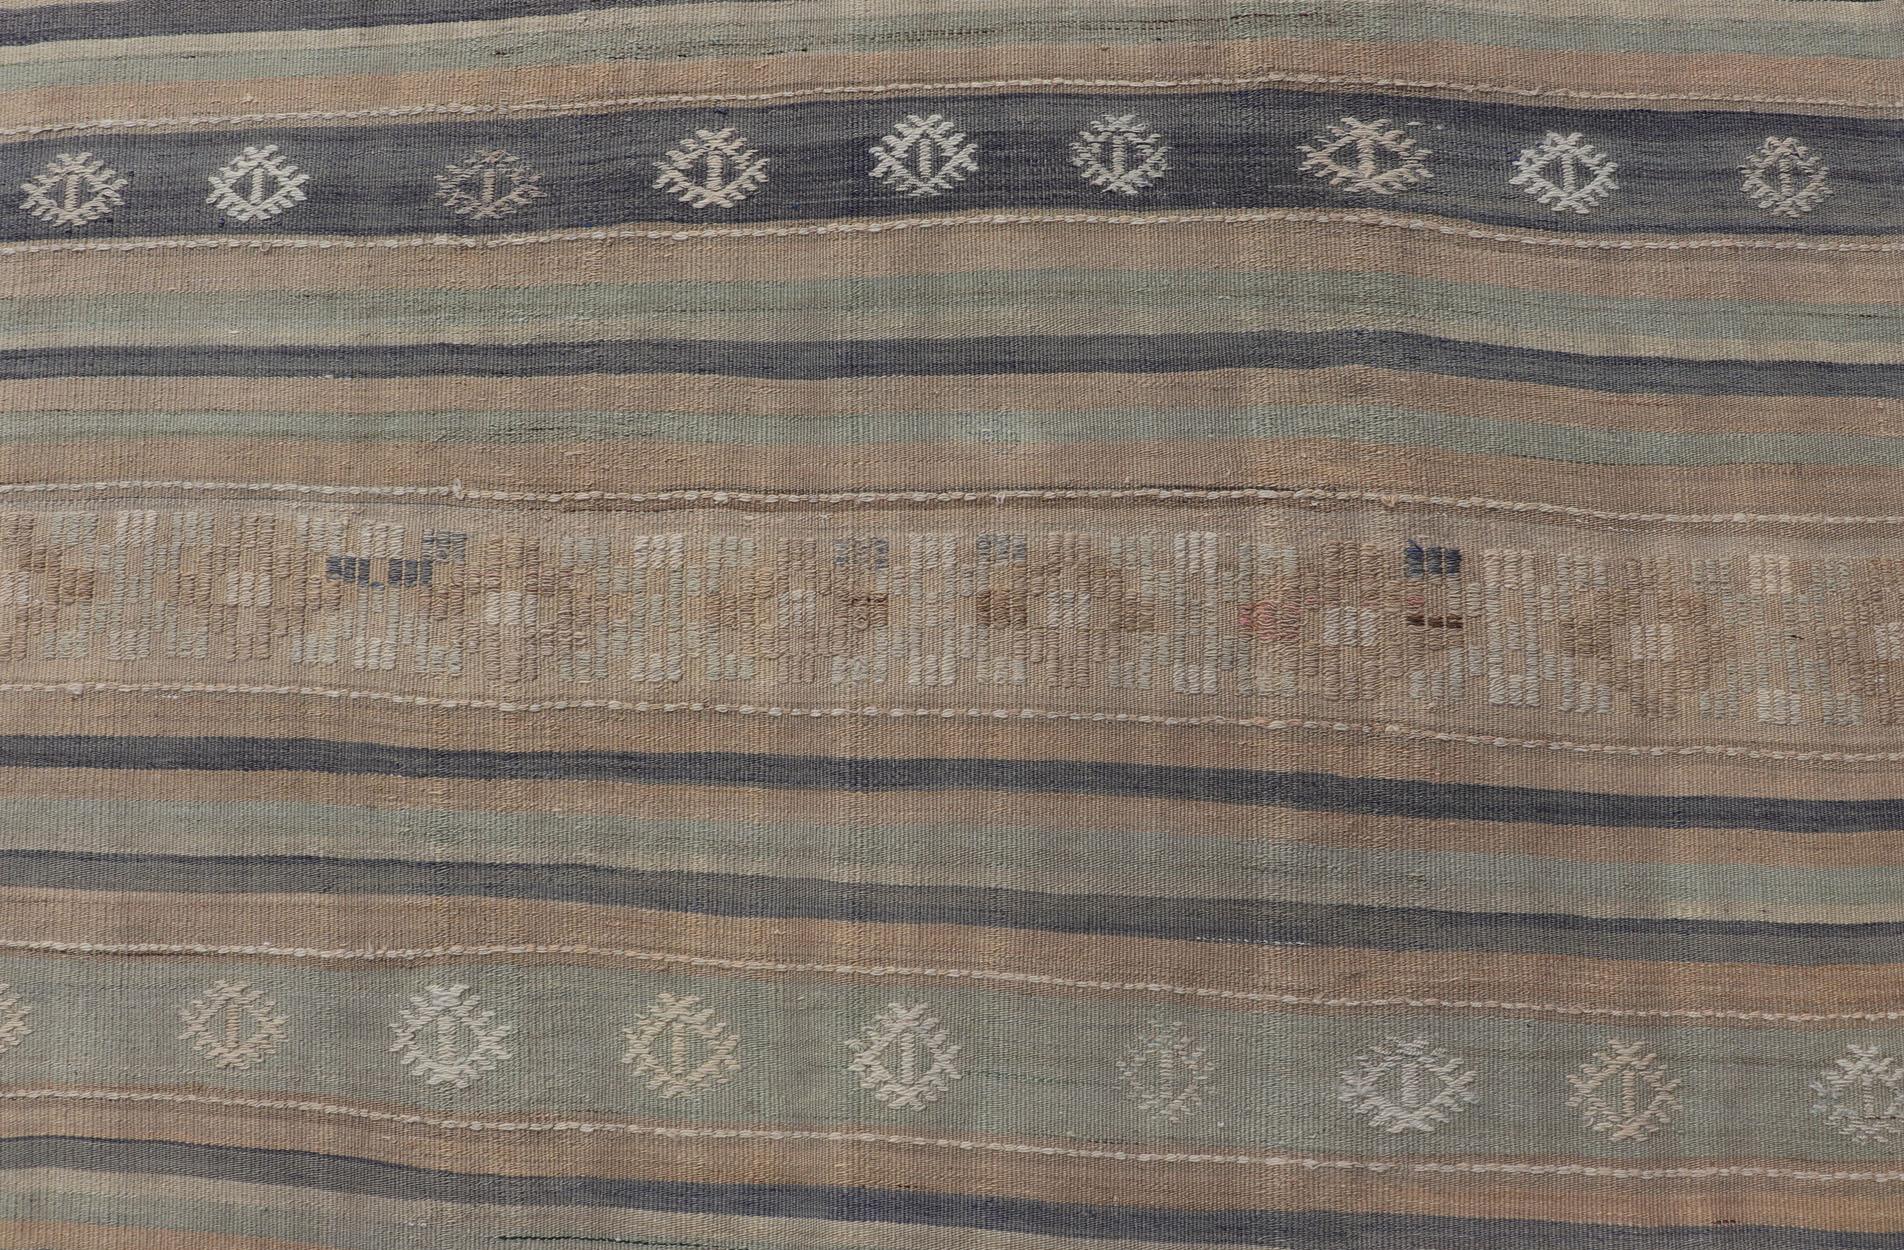 Wool Vintage Hand Woven Turkish Kilim with Stripes in Light Taupe and Neutral Colors For Sale